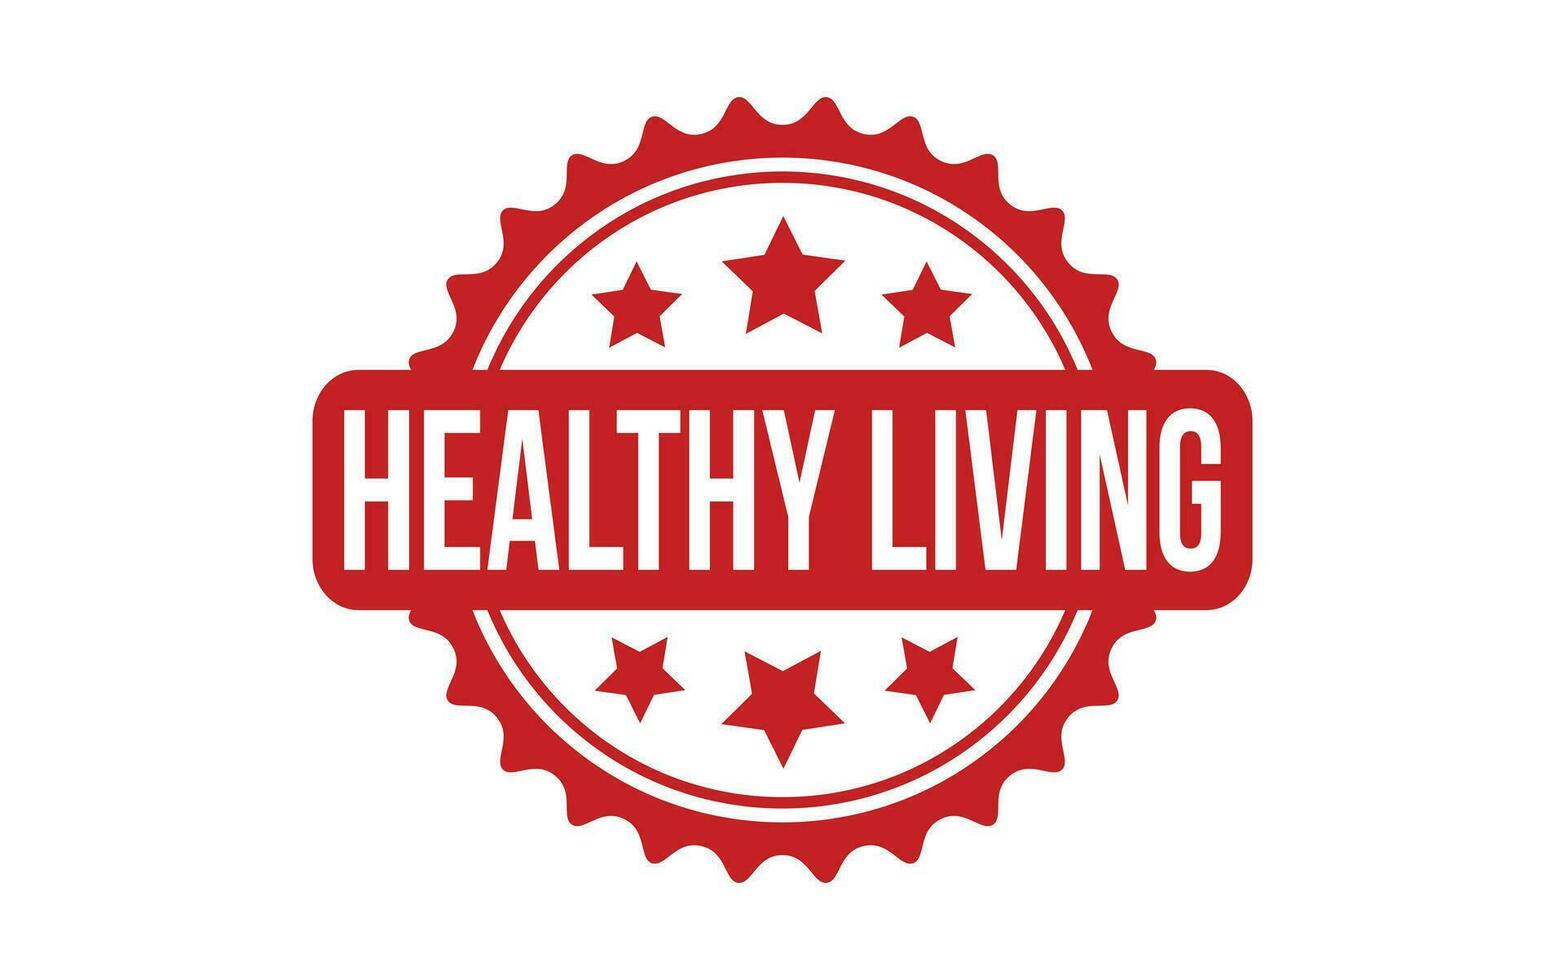 Healthy Living rubber grunge stamp seal vector